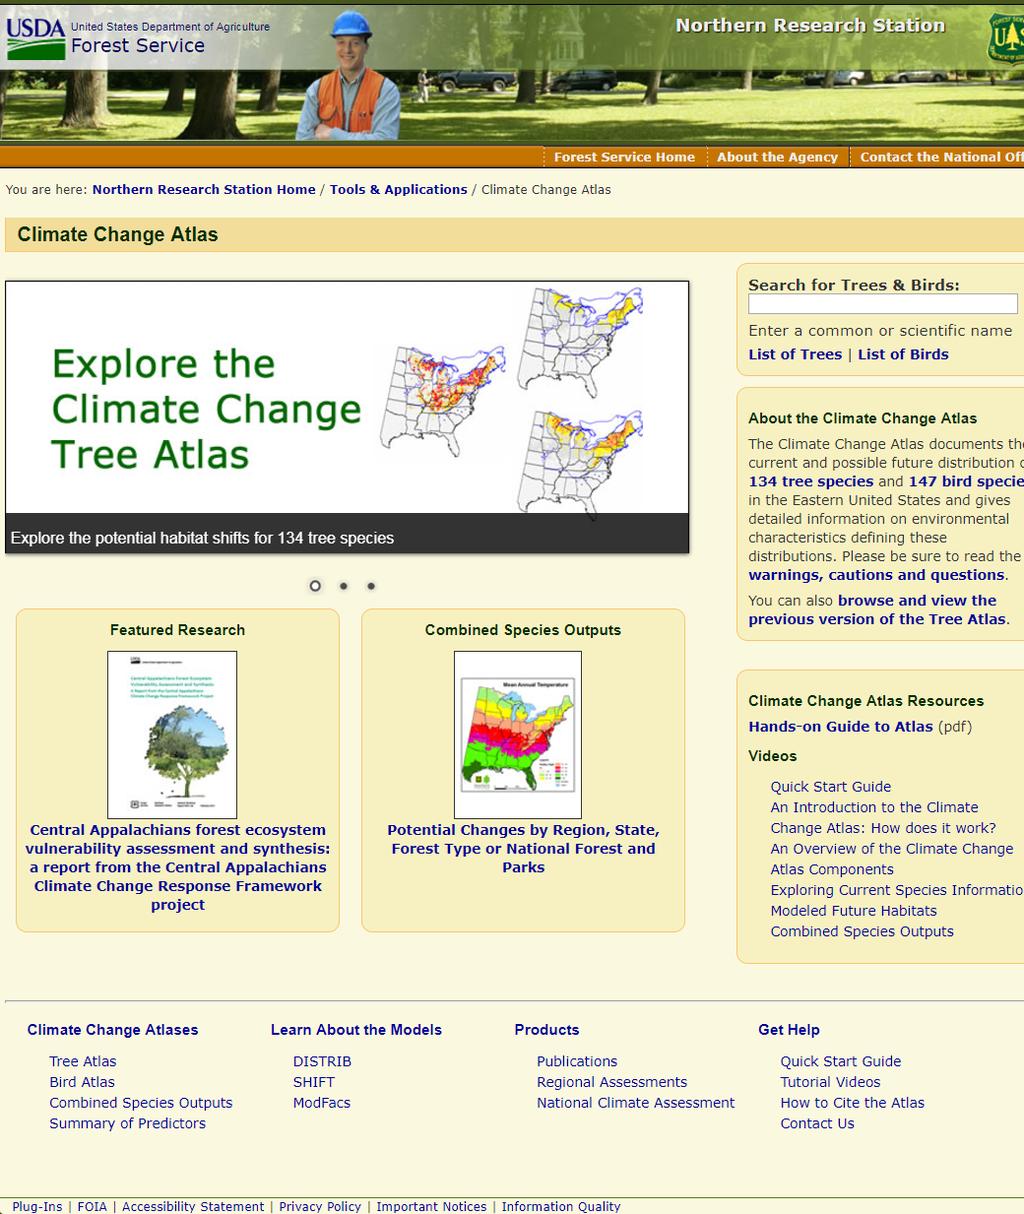 CHANGING HABITAT SUITABILITY: TREE ATLAS 134 Eastern Tree Species Based on statistical relationships between FIA data and